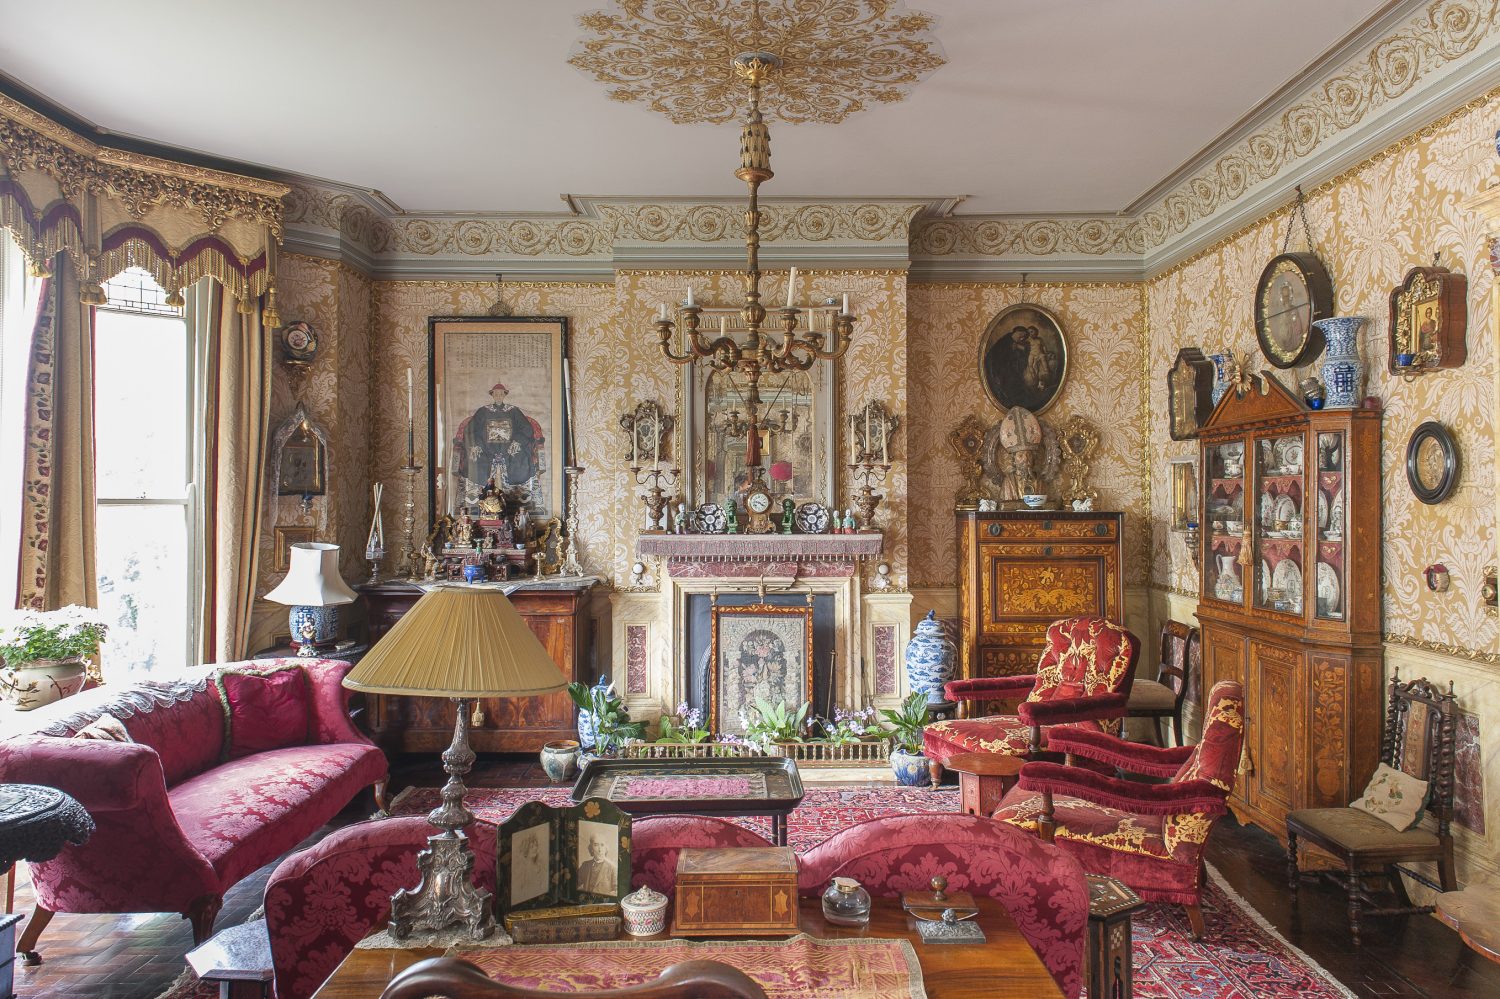 The drawing room is a superb double salon with matching fireplaces at each end